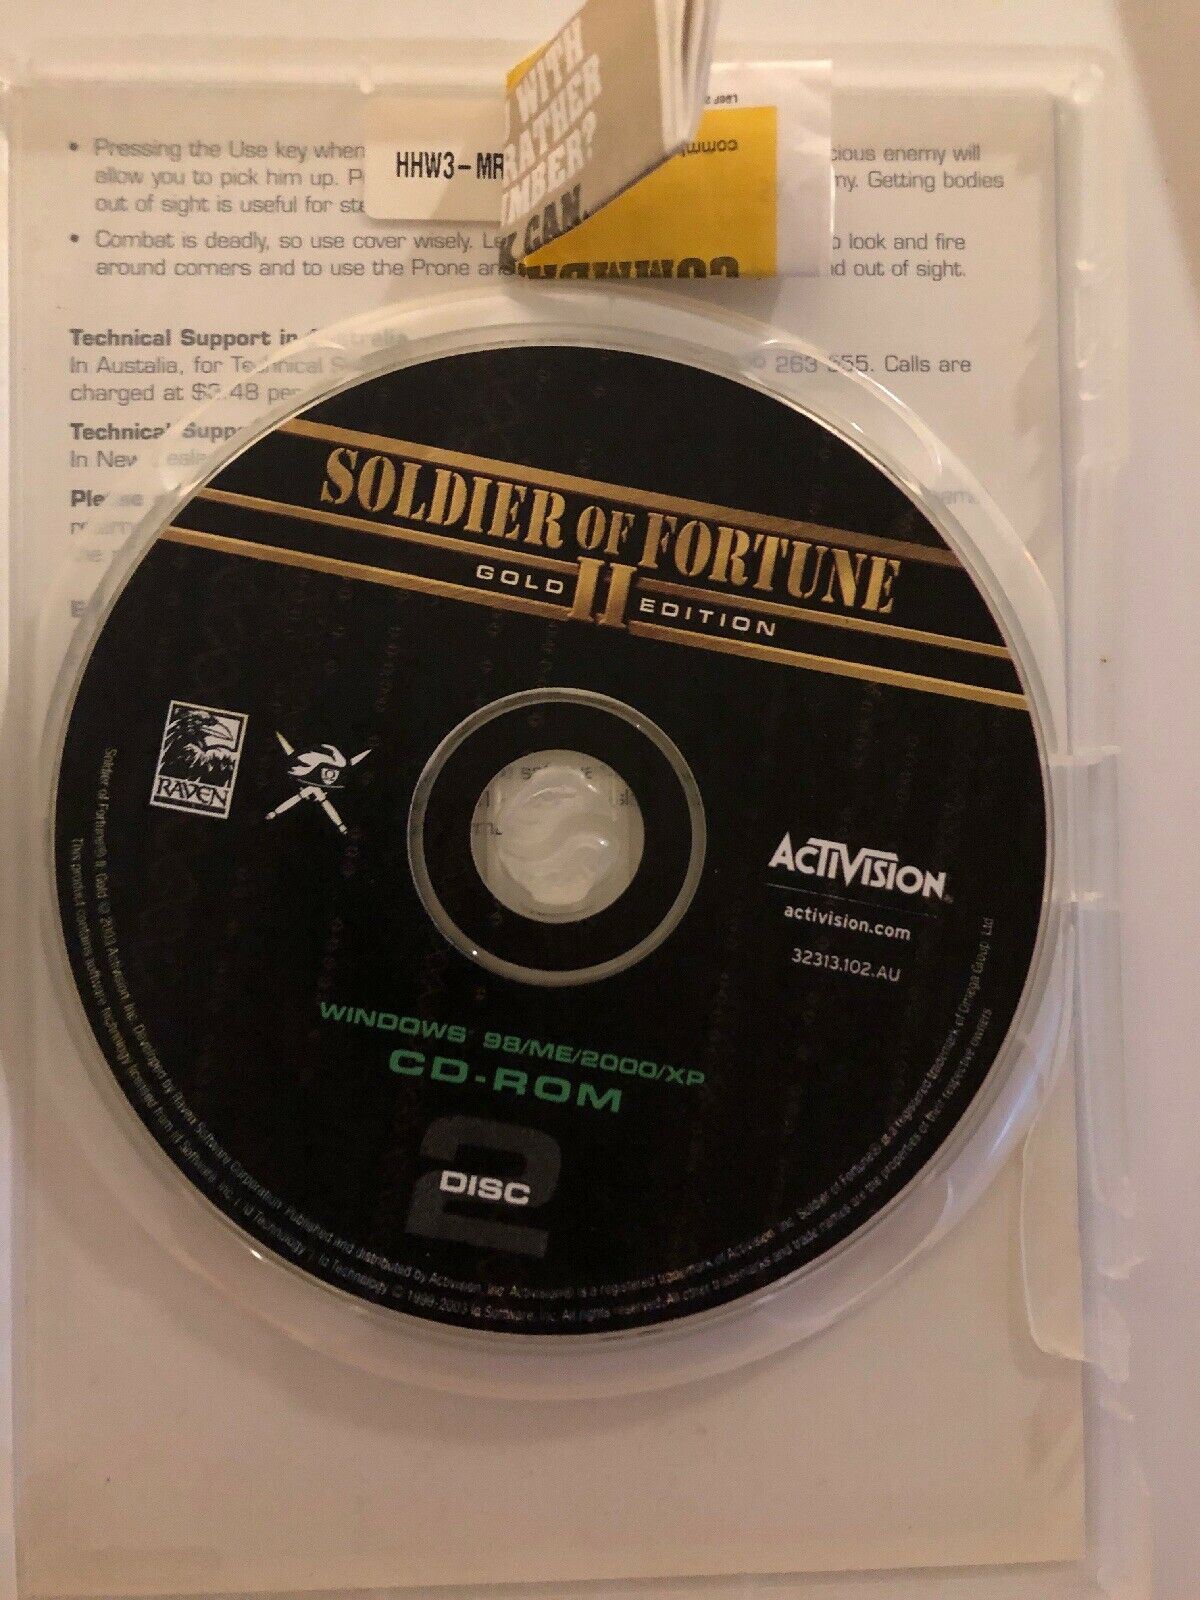 Soldier of Fortune 2 Gold Edition Essential Collection